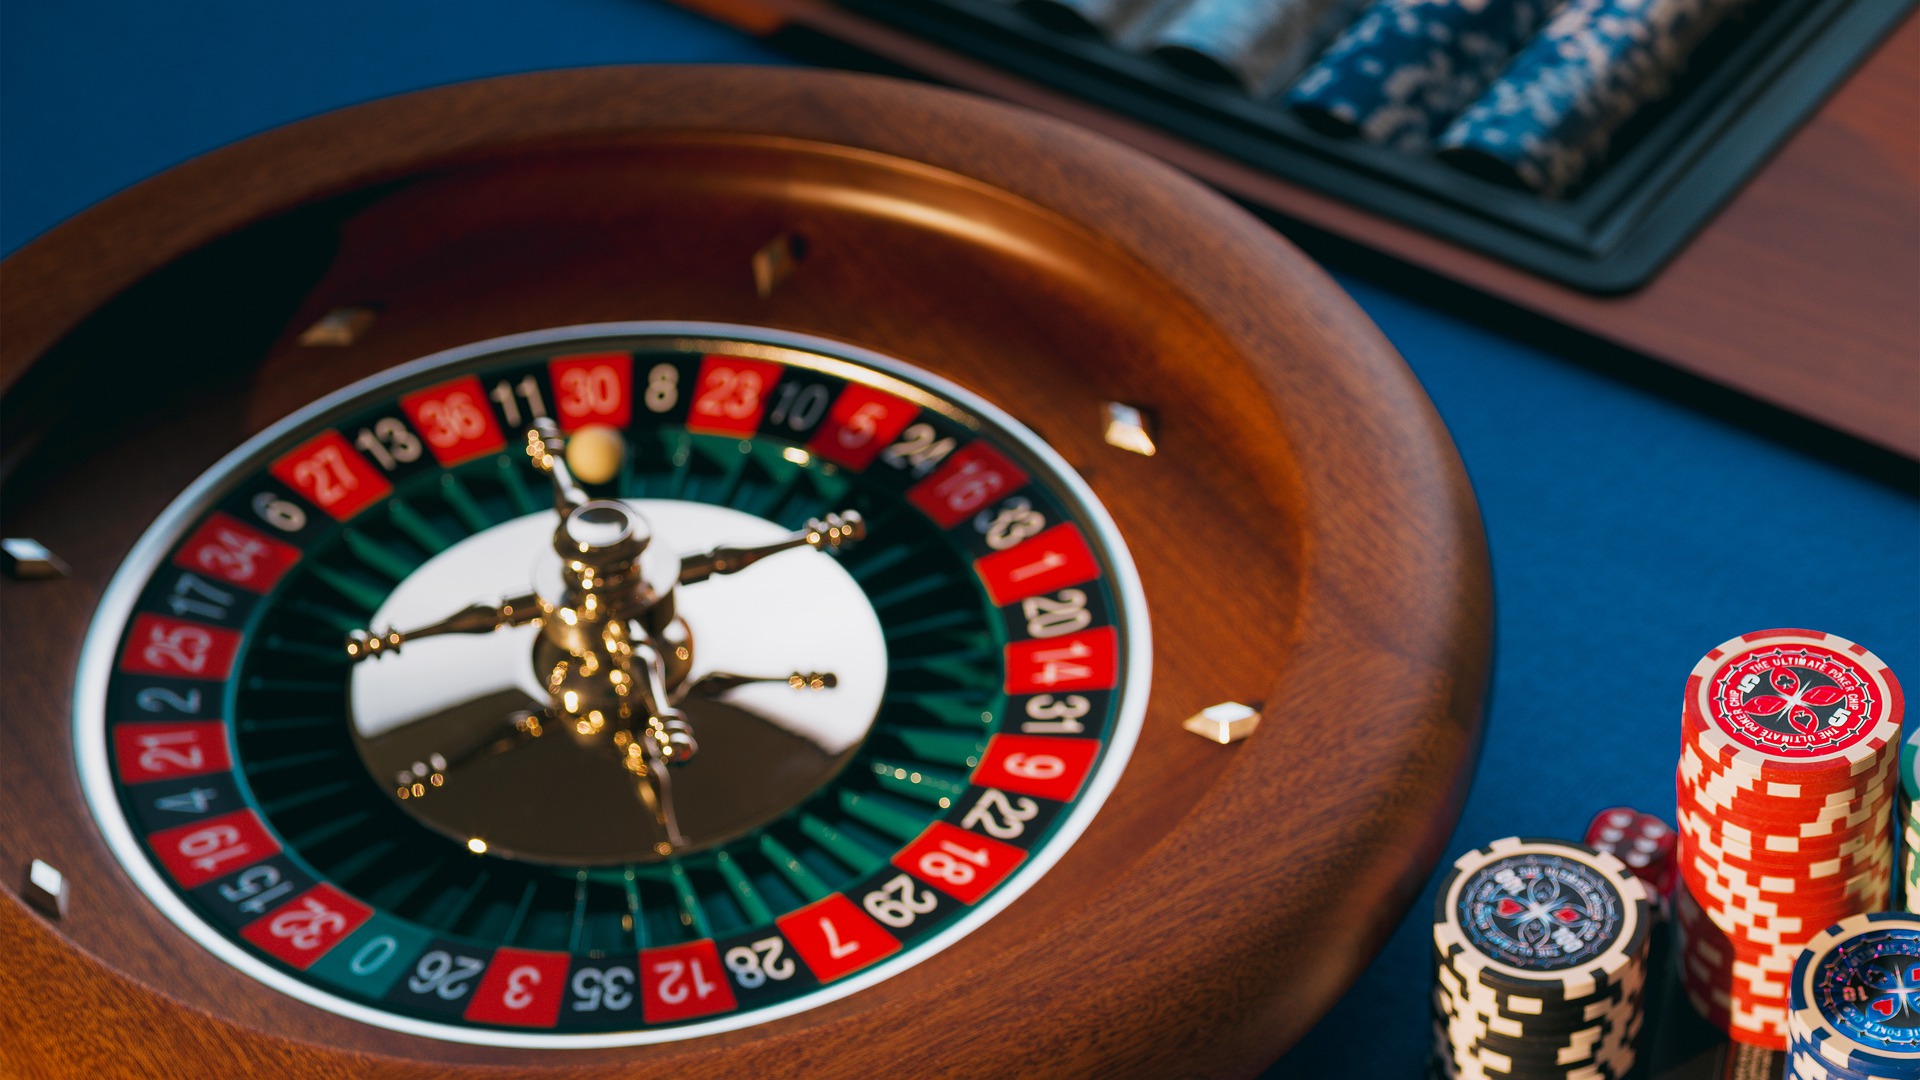 Modern technological adaptation and the rapid growth of online casinos